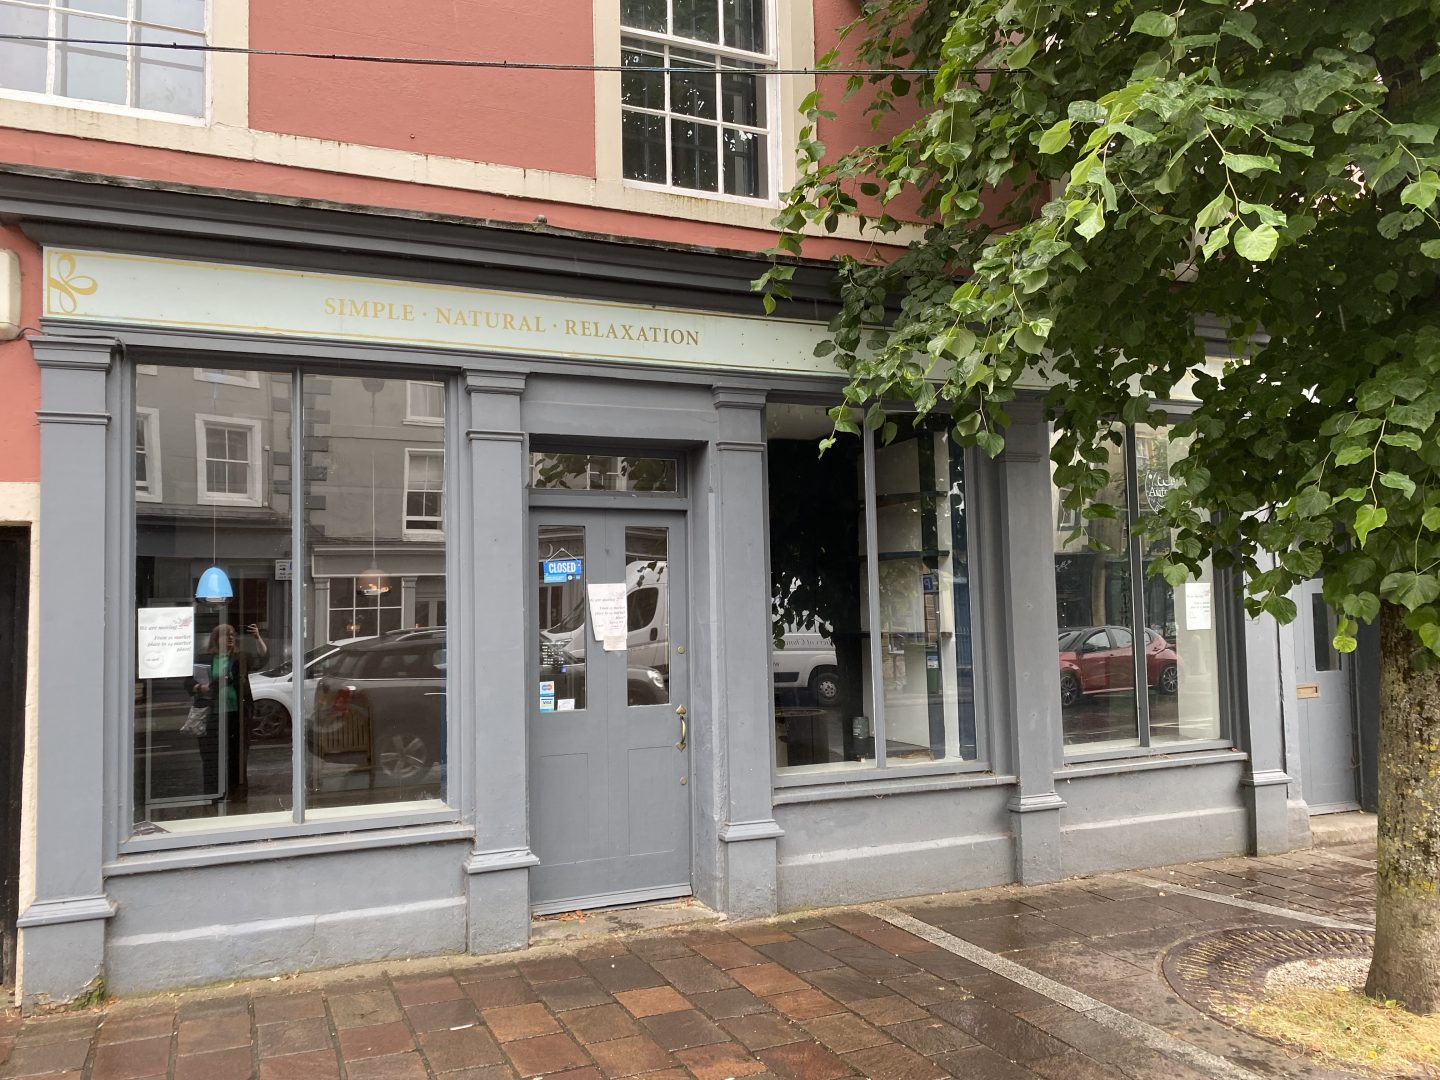 21 Market Place, Cockermouth – LET (SUBJECT TO CONTRACT)